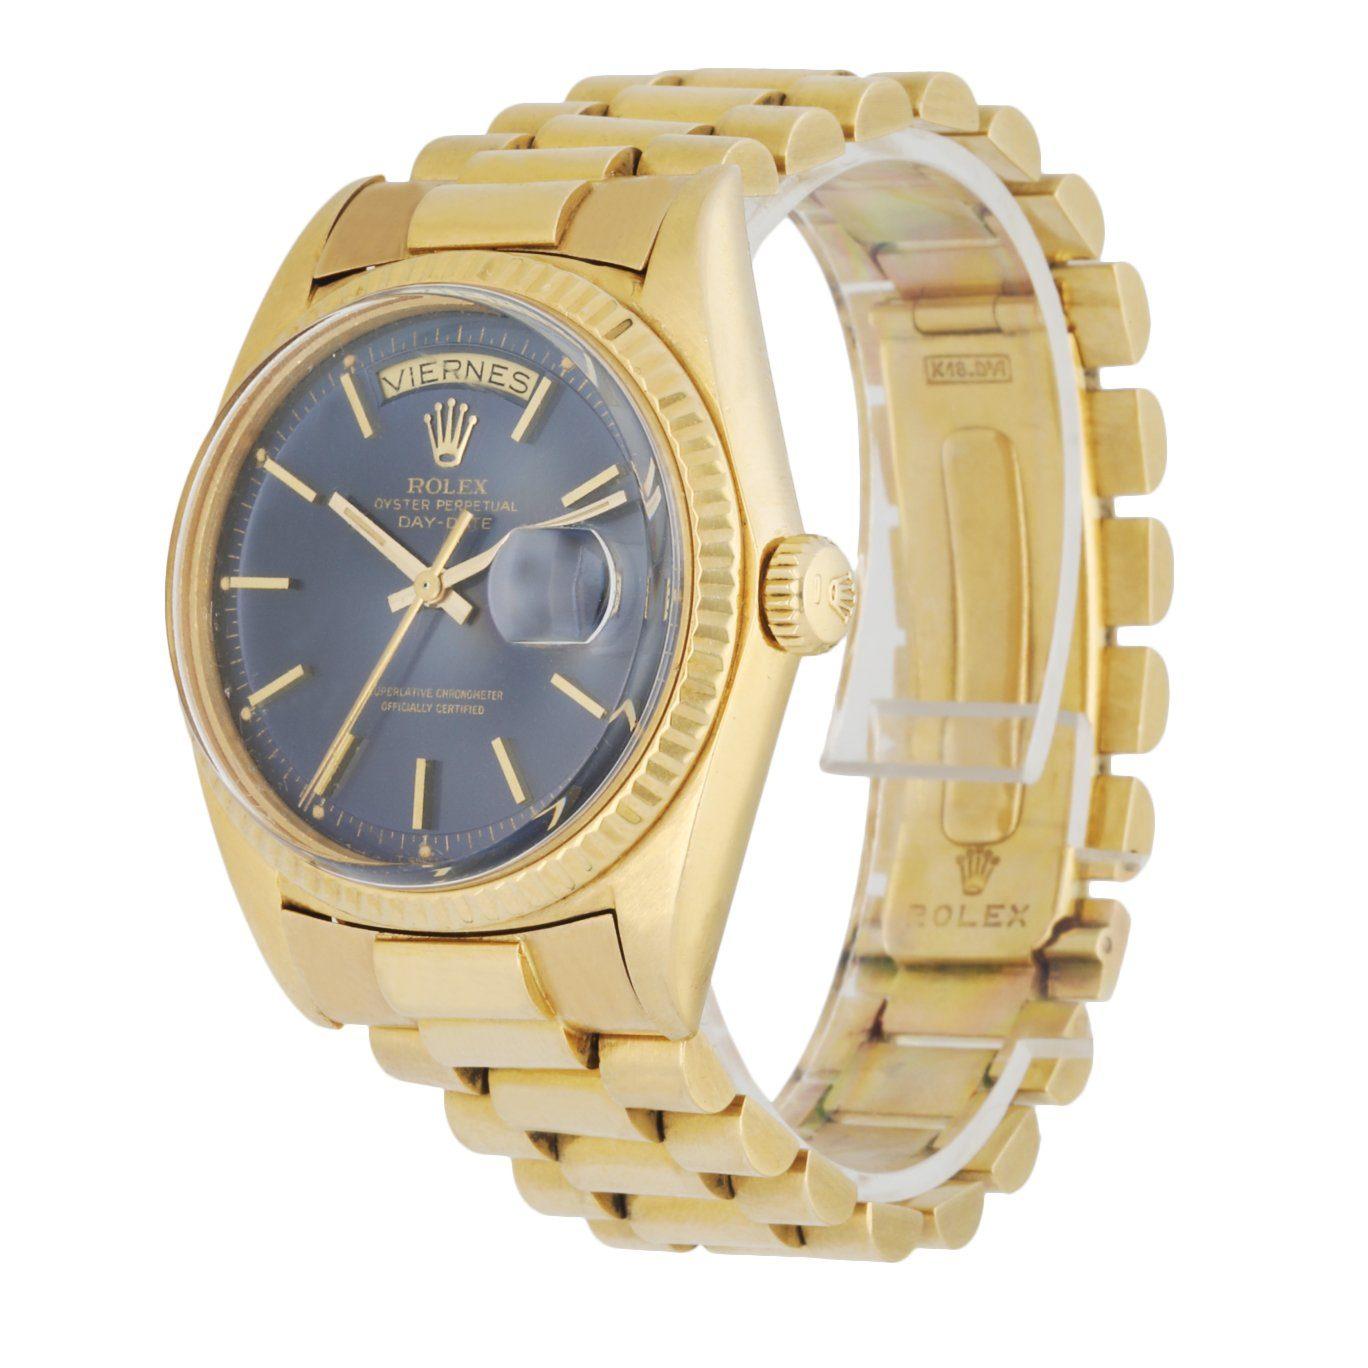 Rolex Day-Date 1803 Men's Watch. 36mm 18k Yellow gold case with 18K yellow gold fluted bezel. Blue dial with gold hands and index hour markers. Minute markers on the outer dial. Date display at the 3 o'clock position. Spanish day display at the 12